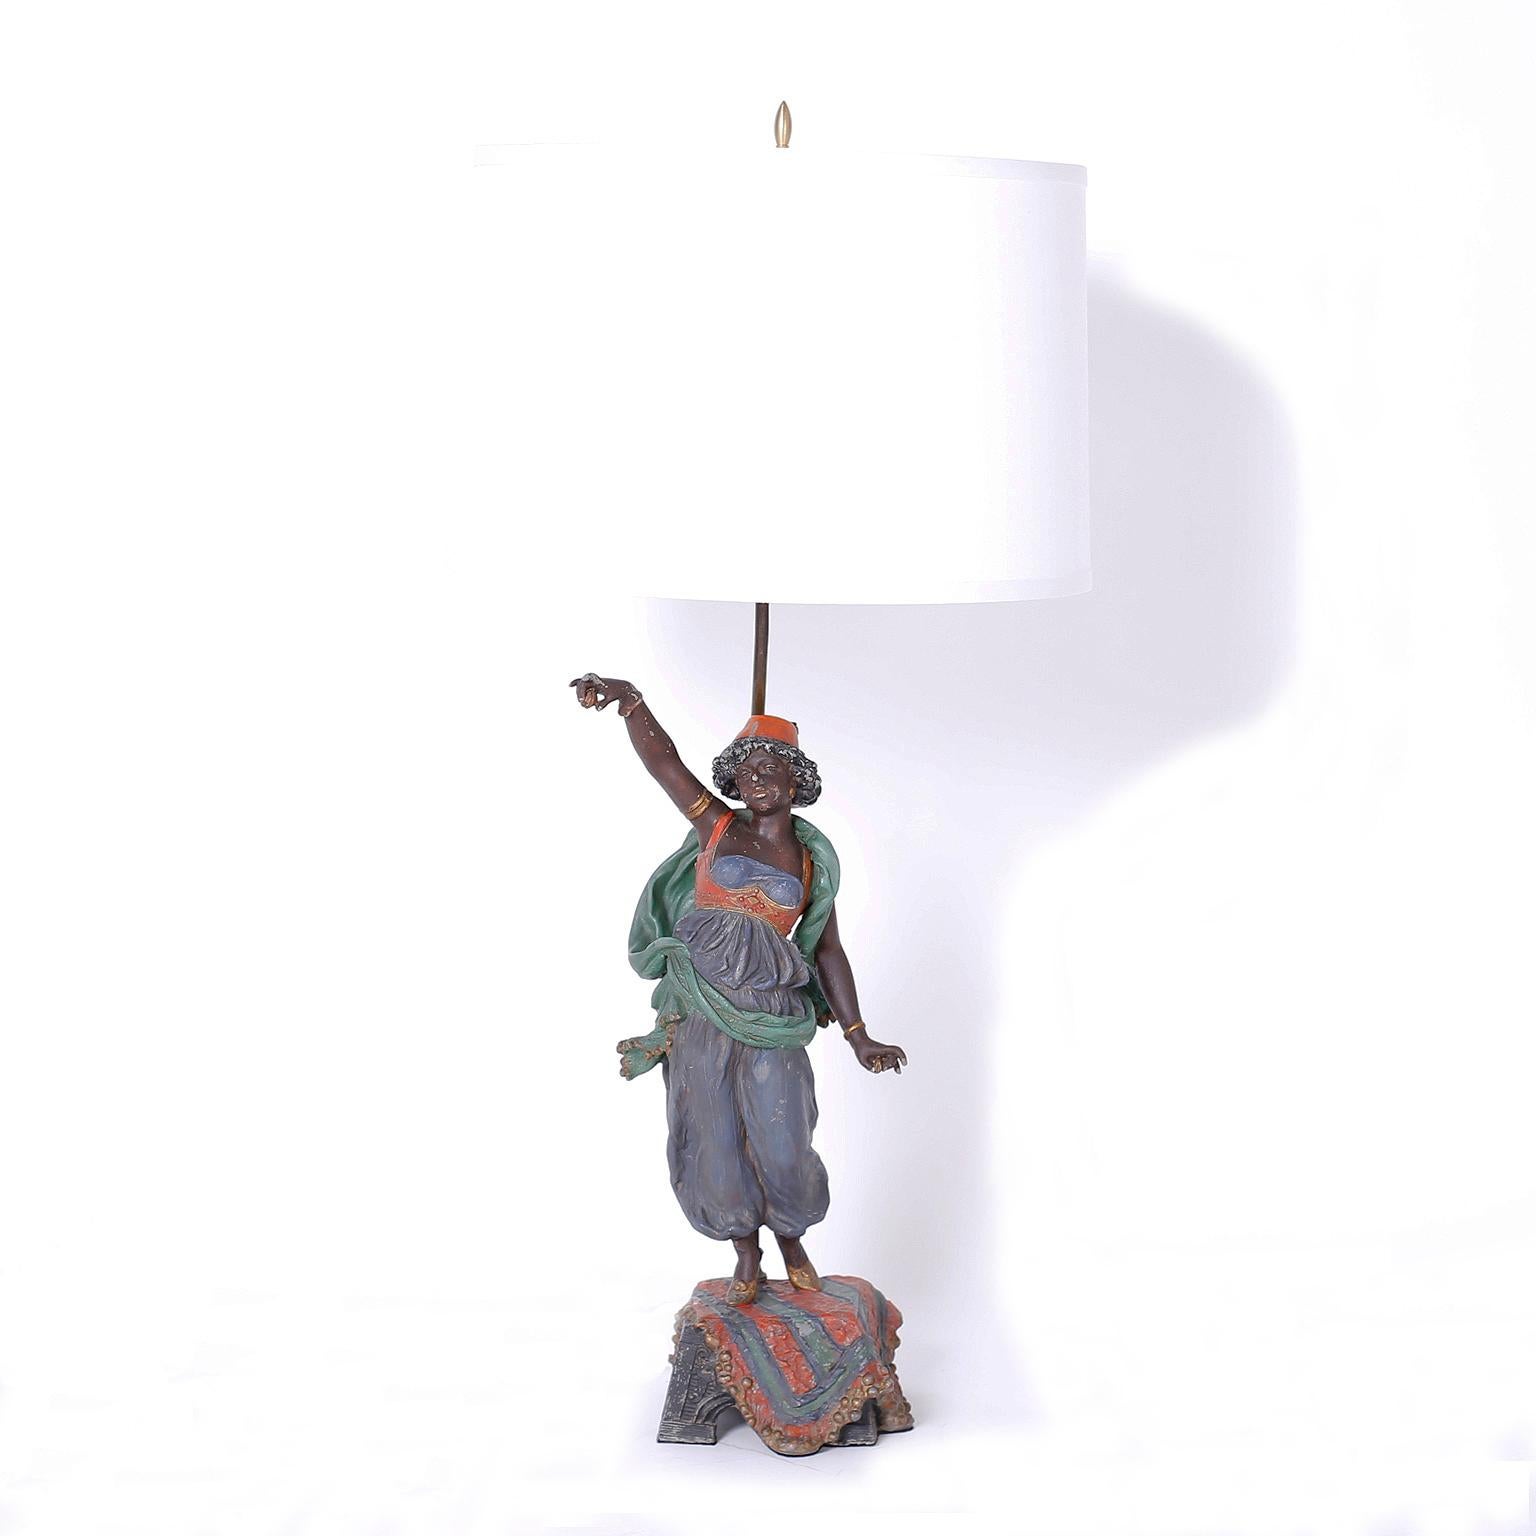 Pair of antique table lamps crafted in painted cast metal, depicting male and female Moroccan figures, a dancer, and a musician both dressed in exotic native garb and standing on a pedestal with carpets.